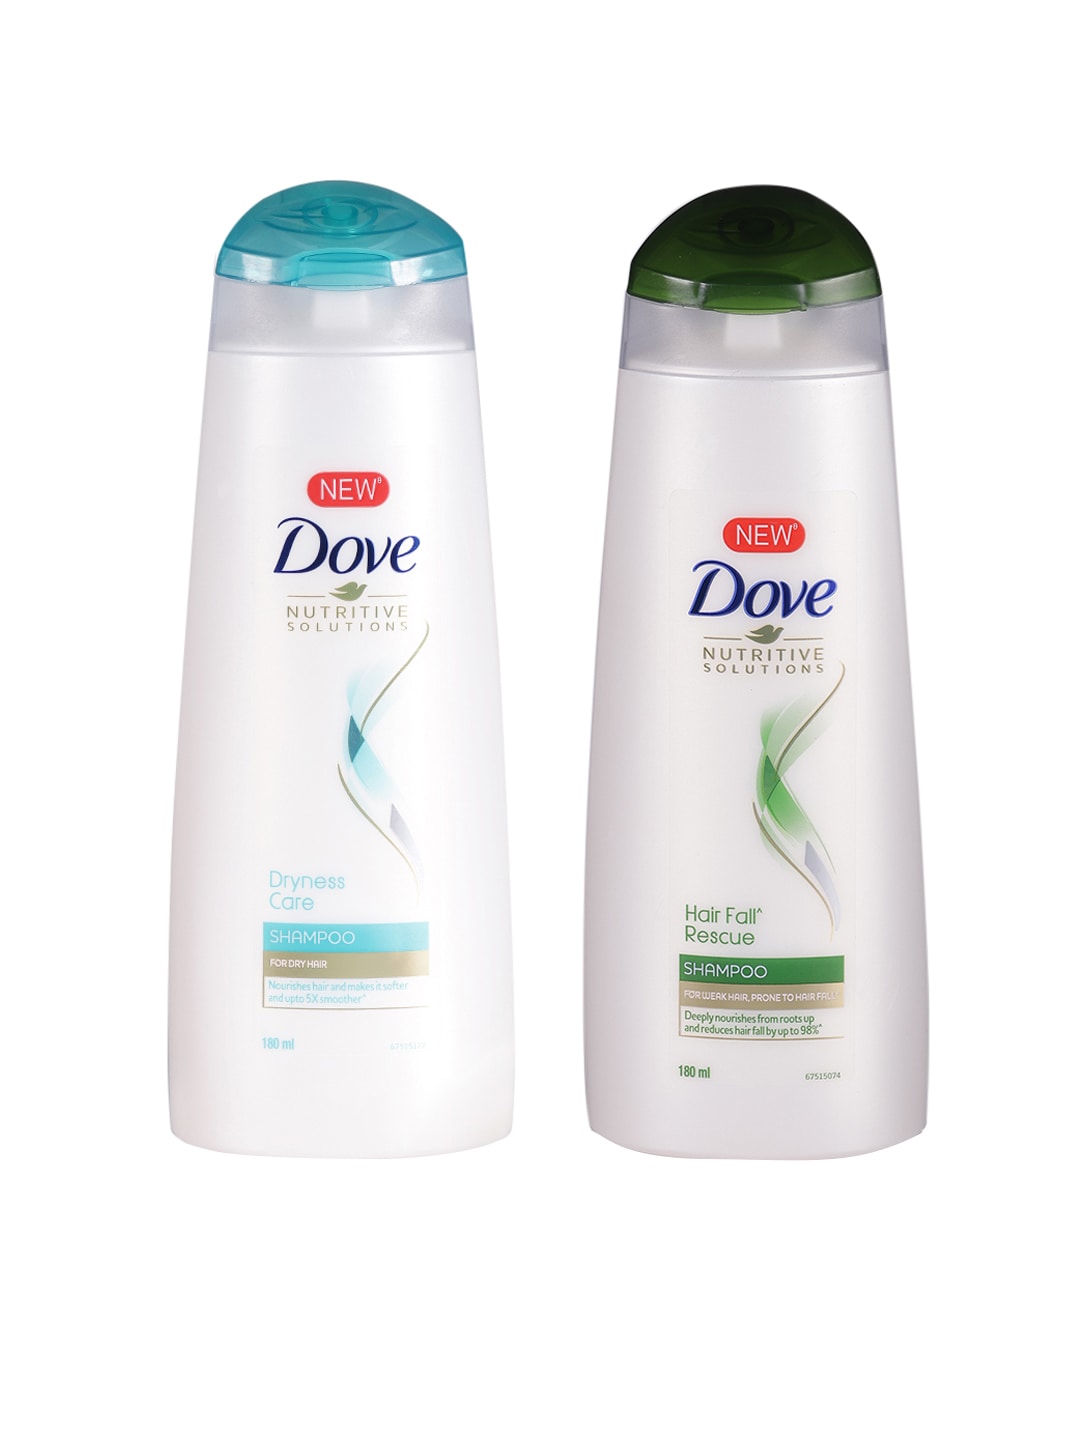 Dove Set Of Dryness Care Shampoo & Hair Fall Rescue Shampoo Price in India